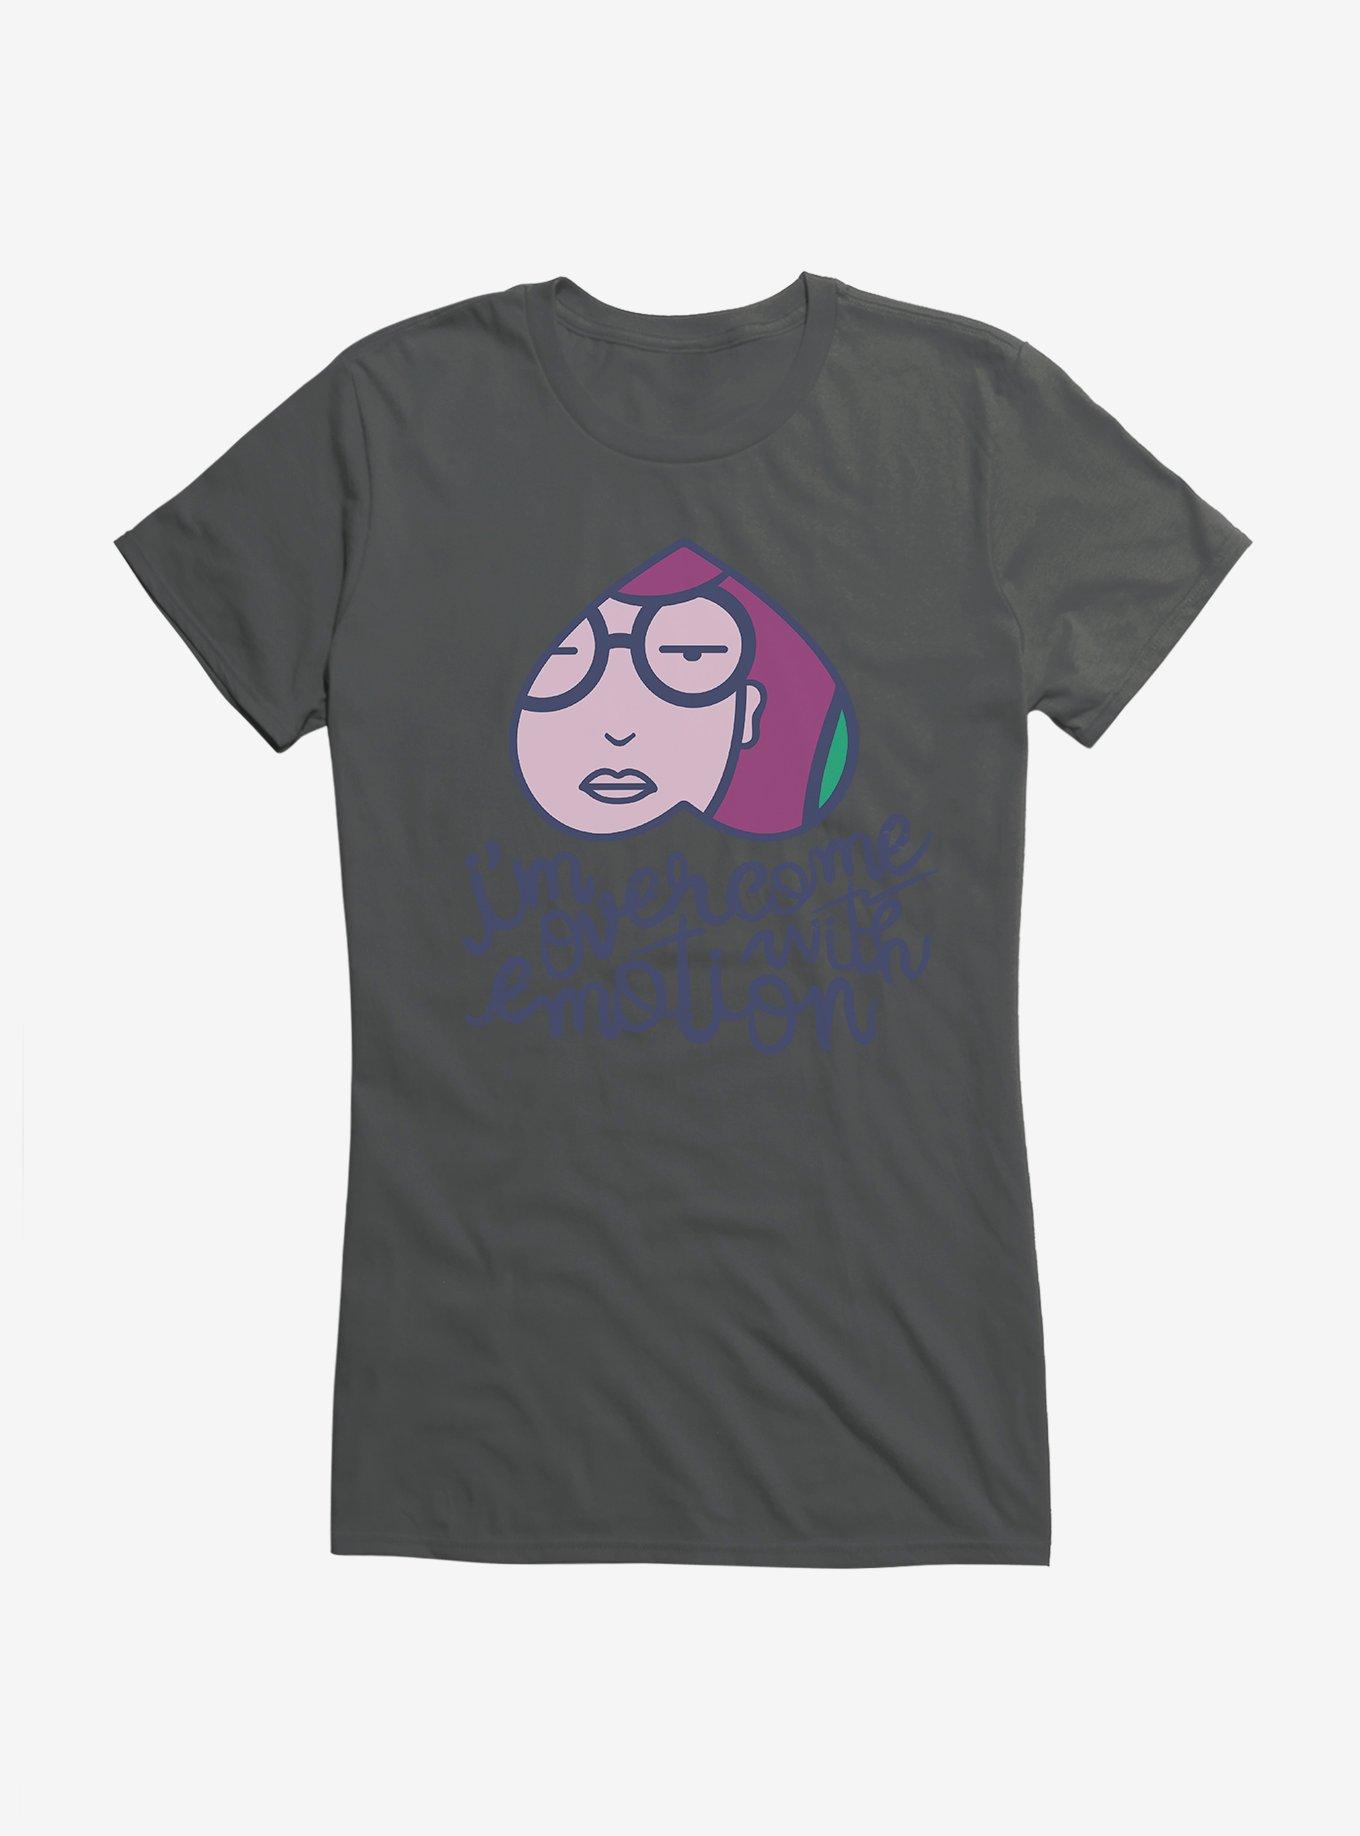 Daria Overcome with Emotion Heart Girls T-Shirt